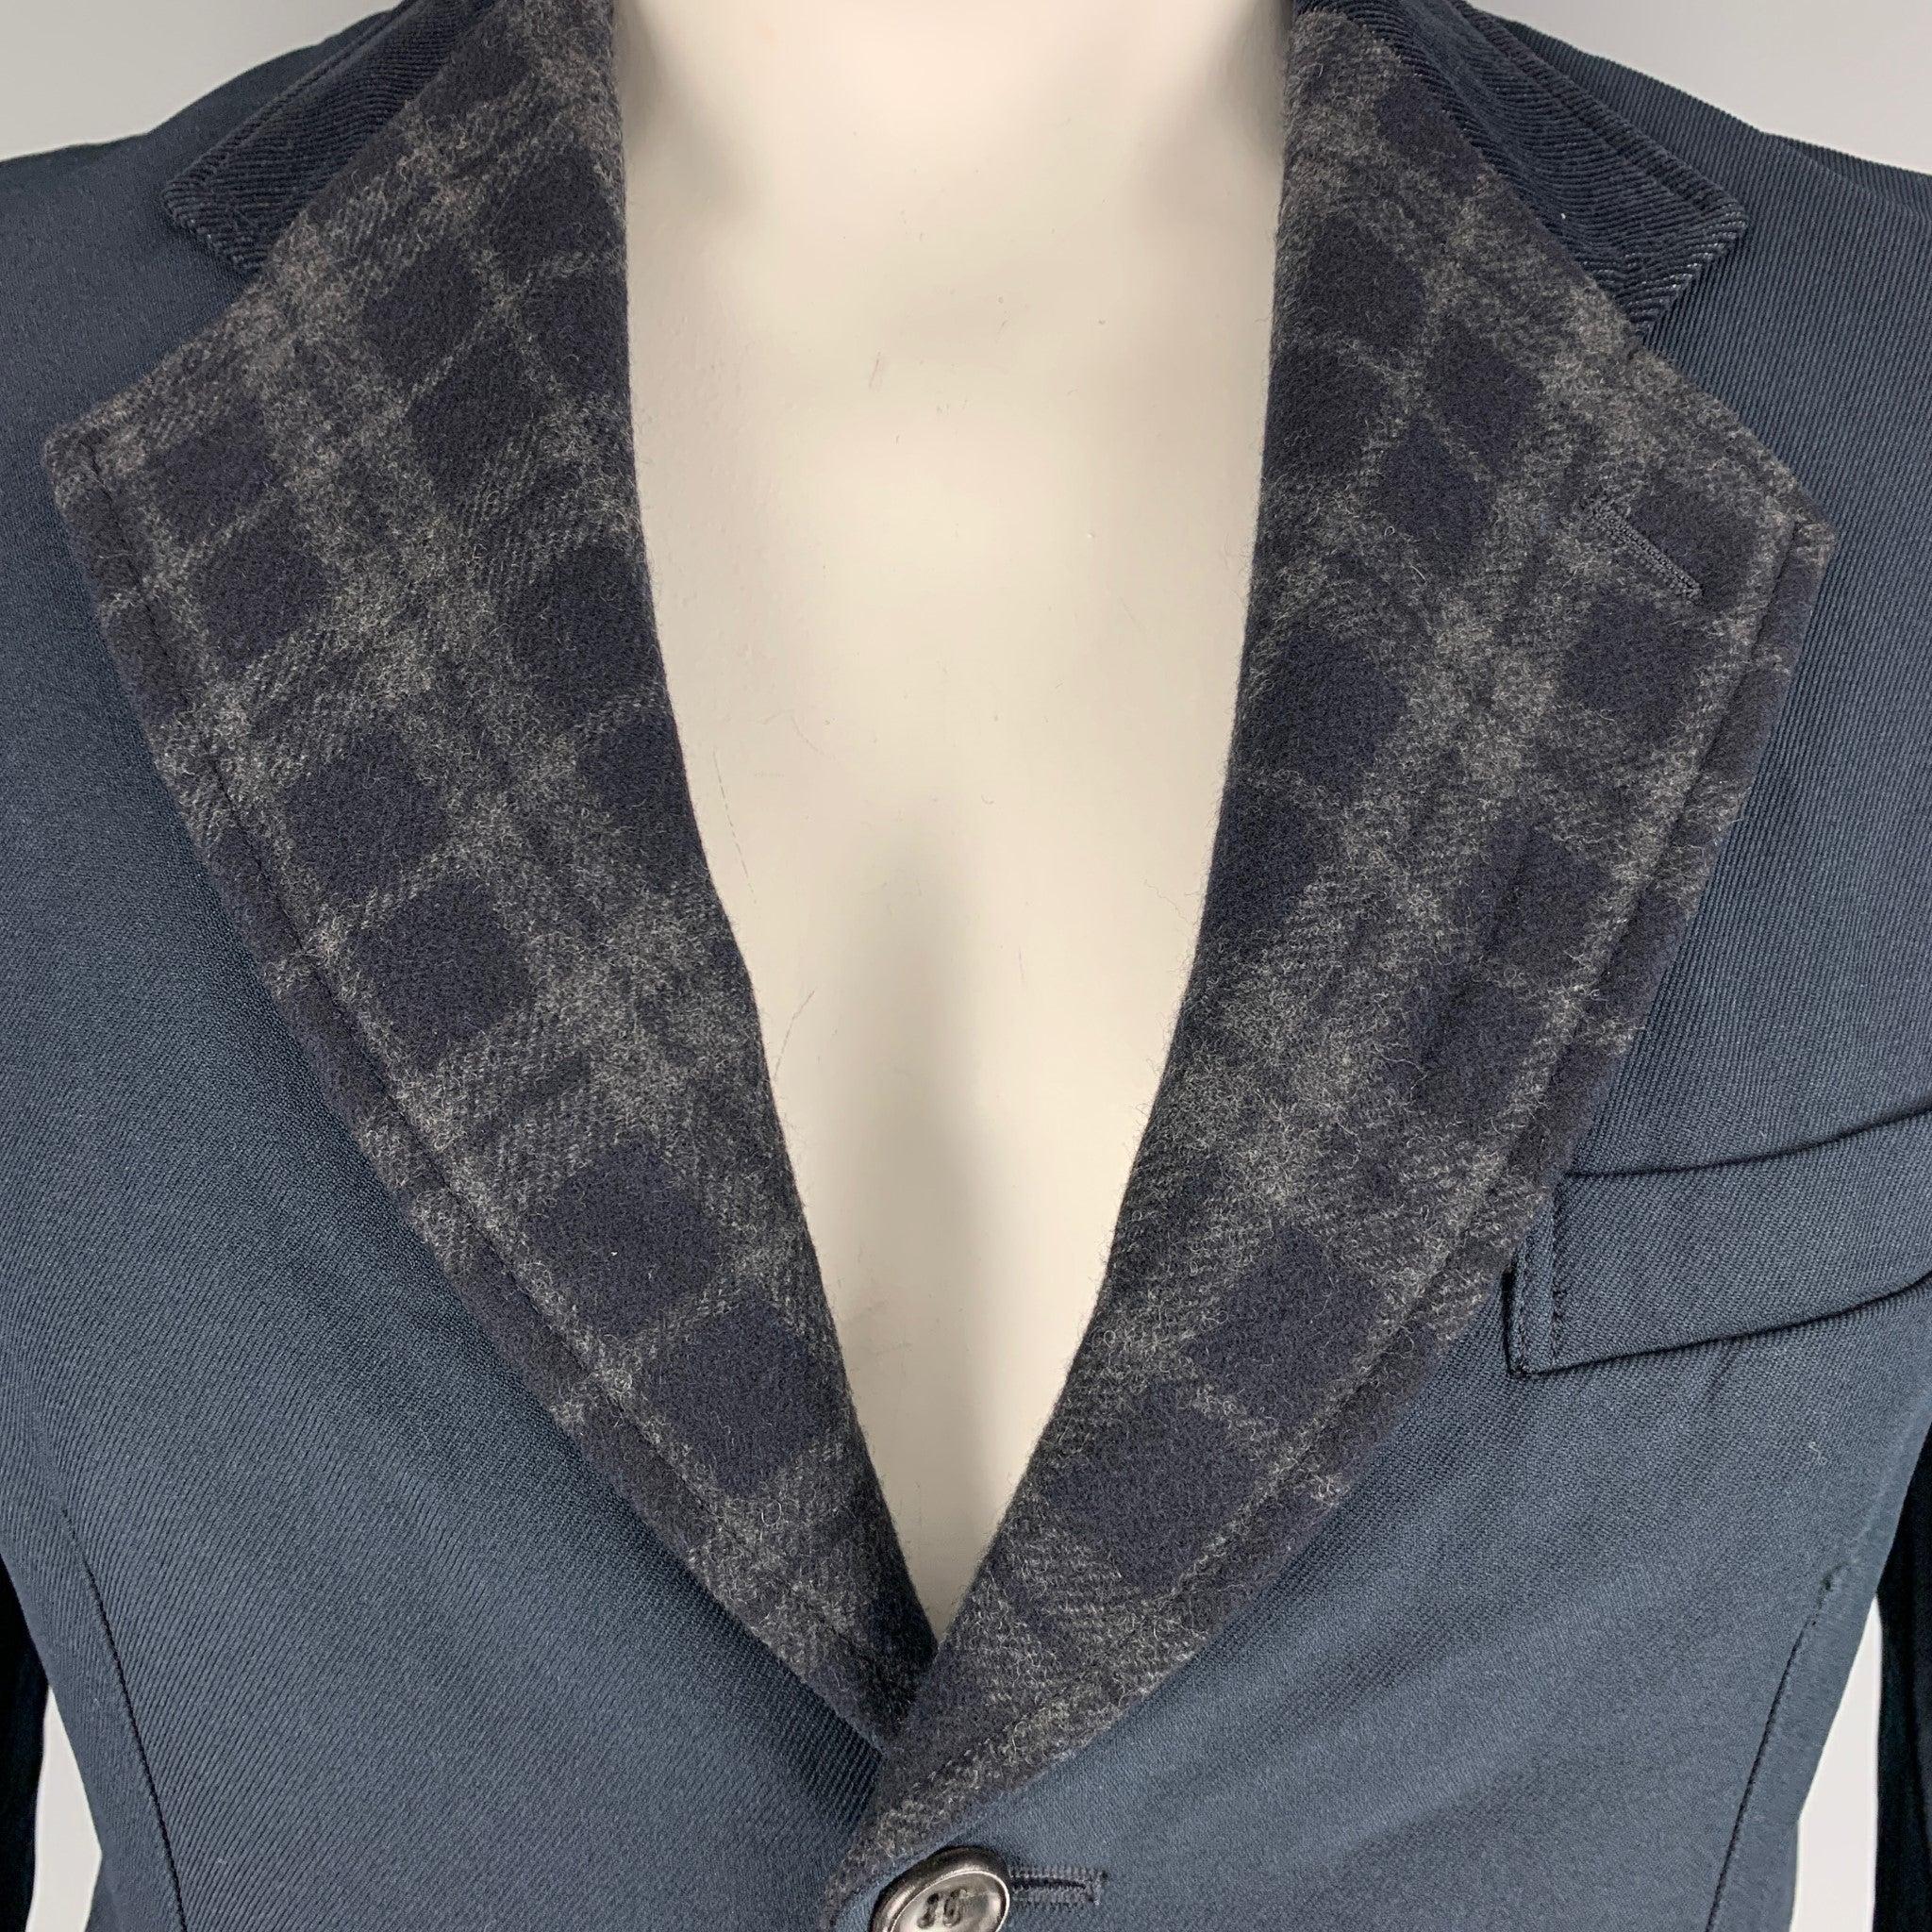 COMME des GARCONS HOMME single breasted jacket comes in navy blue polyester, featuring a plaid notch lapel, and flap pockets. Made in Japan.Excellent Pre-Owned Condition. 

Marked:   L 

Measurements: 
 
Shoulder: 19 inches Chest: 40 inches Sleeve: